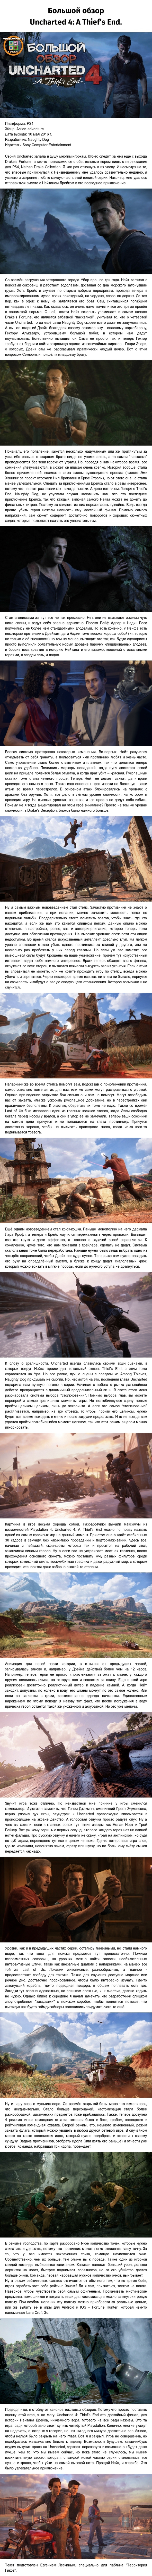   Uncharted 4: A Thief's End. , , Uncharted 4, Playstation 4, 